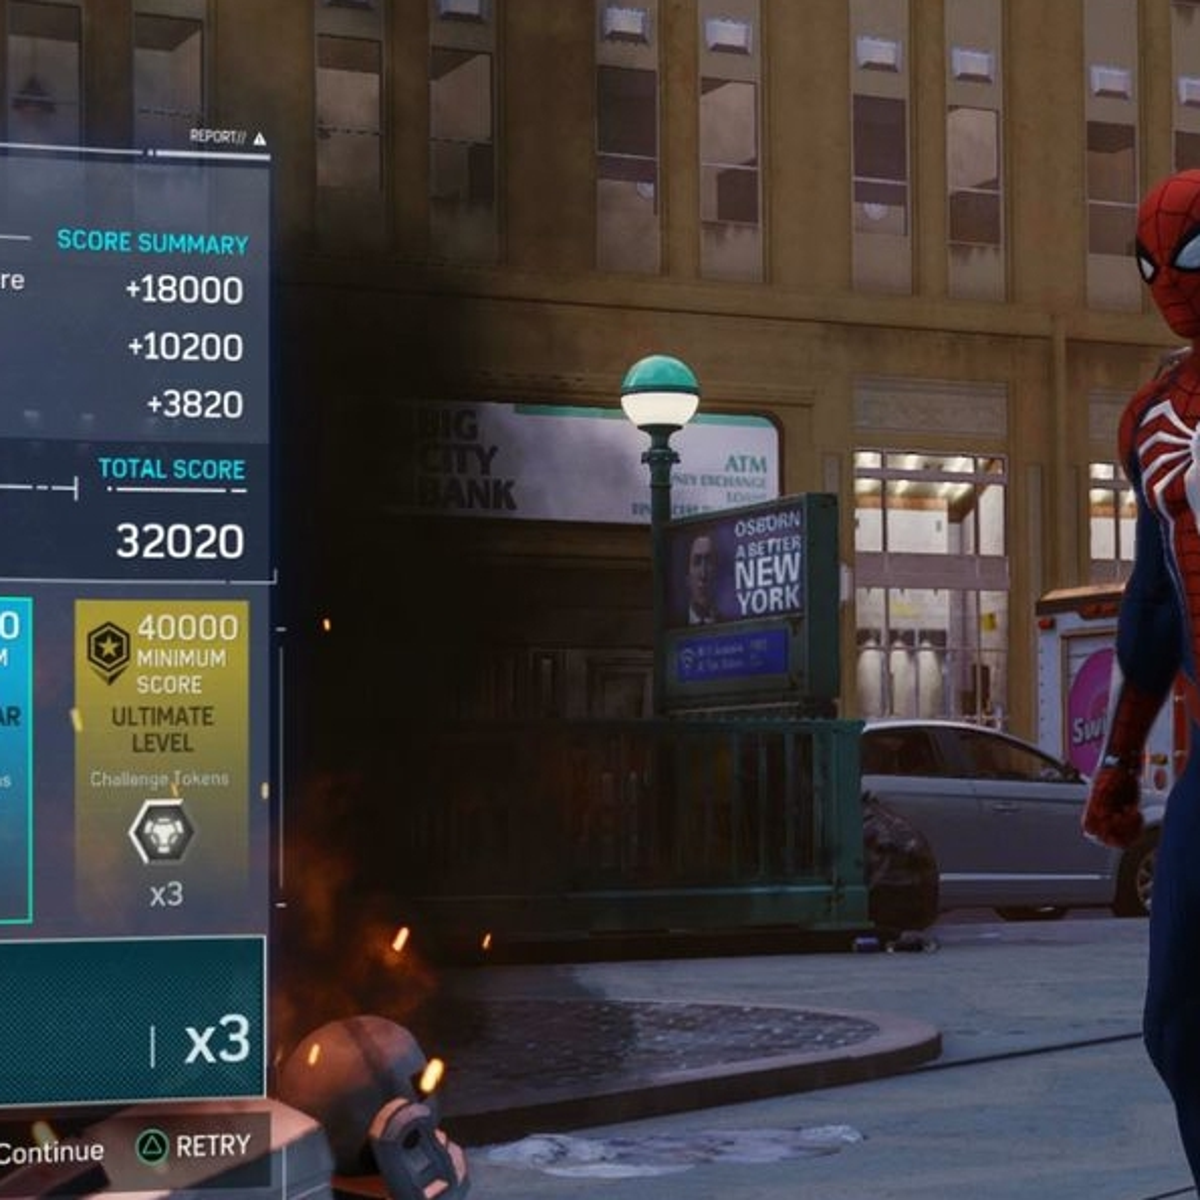 How to get easier Challenge Tokens in Spider-Man |